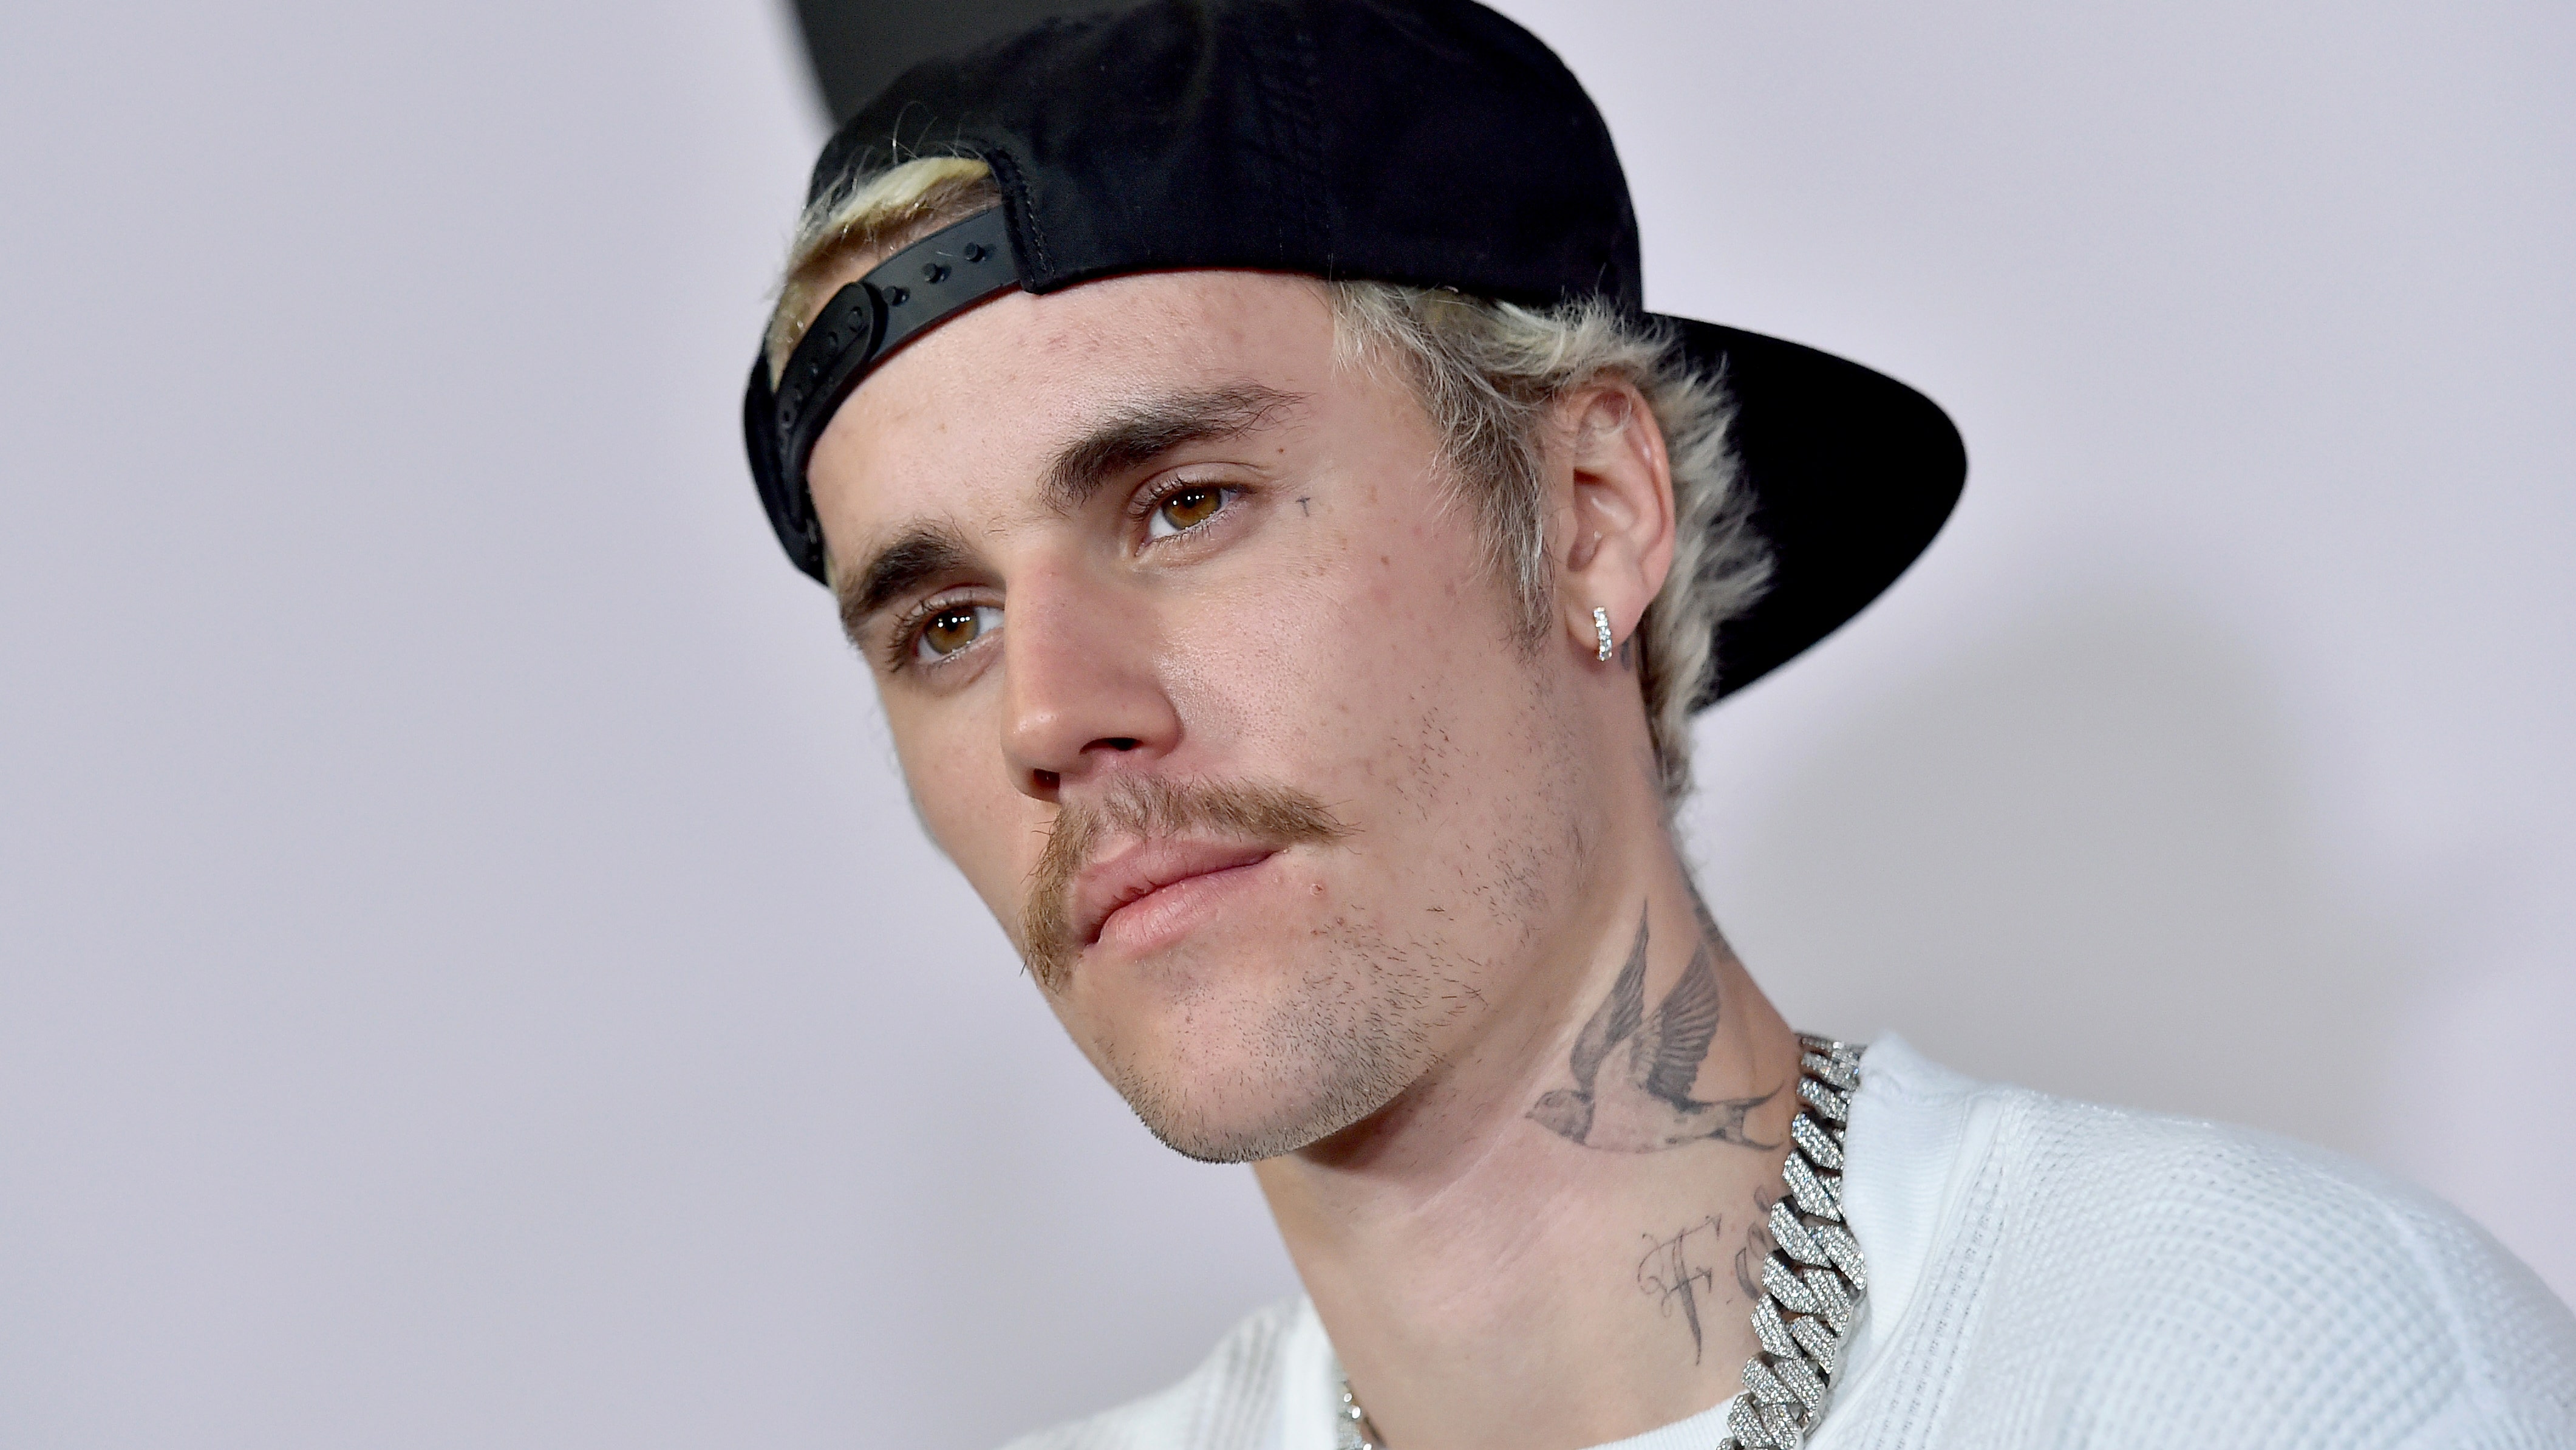 Justin Bieber visited California prison to 'support faith-based programs'